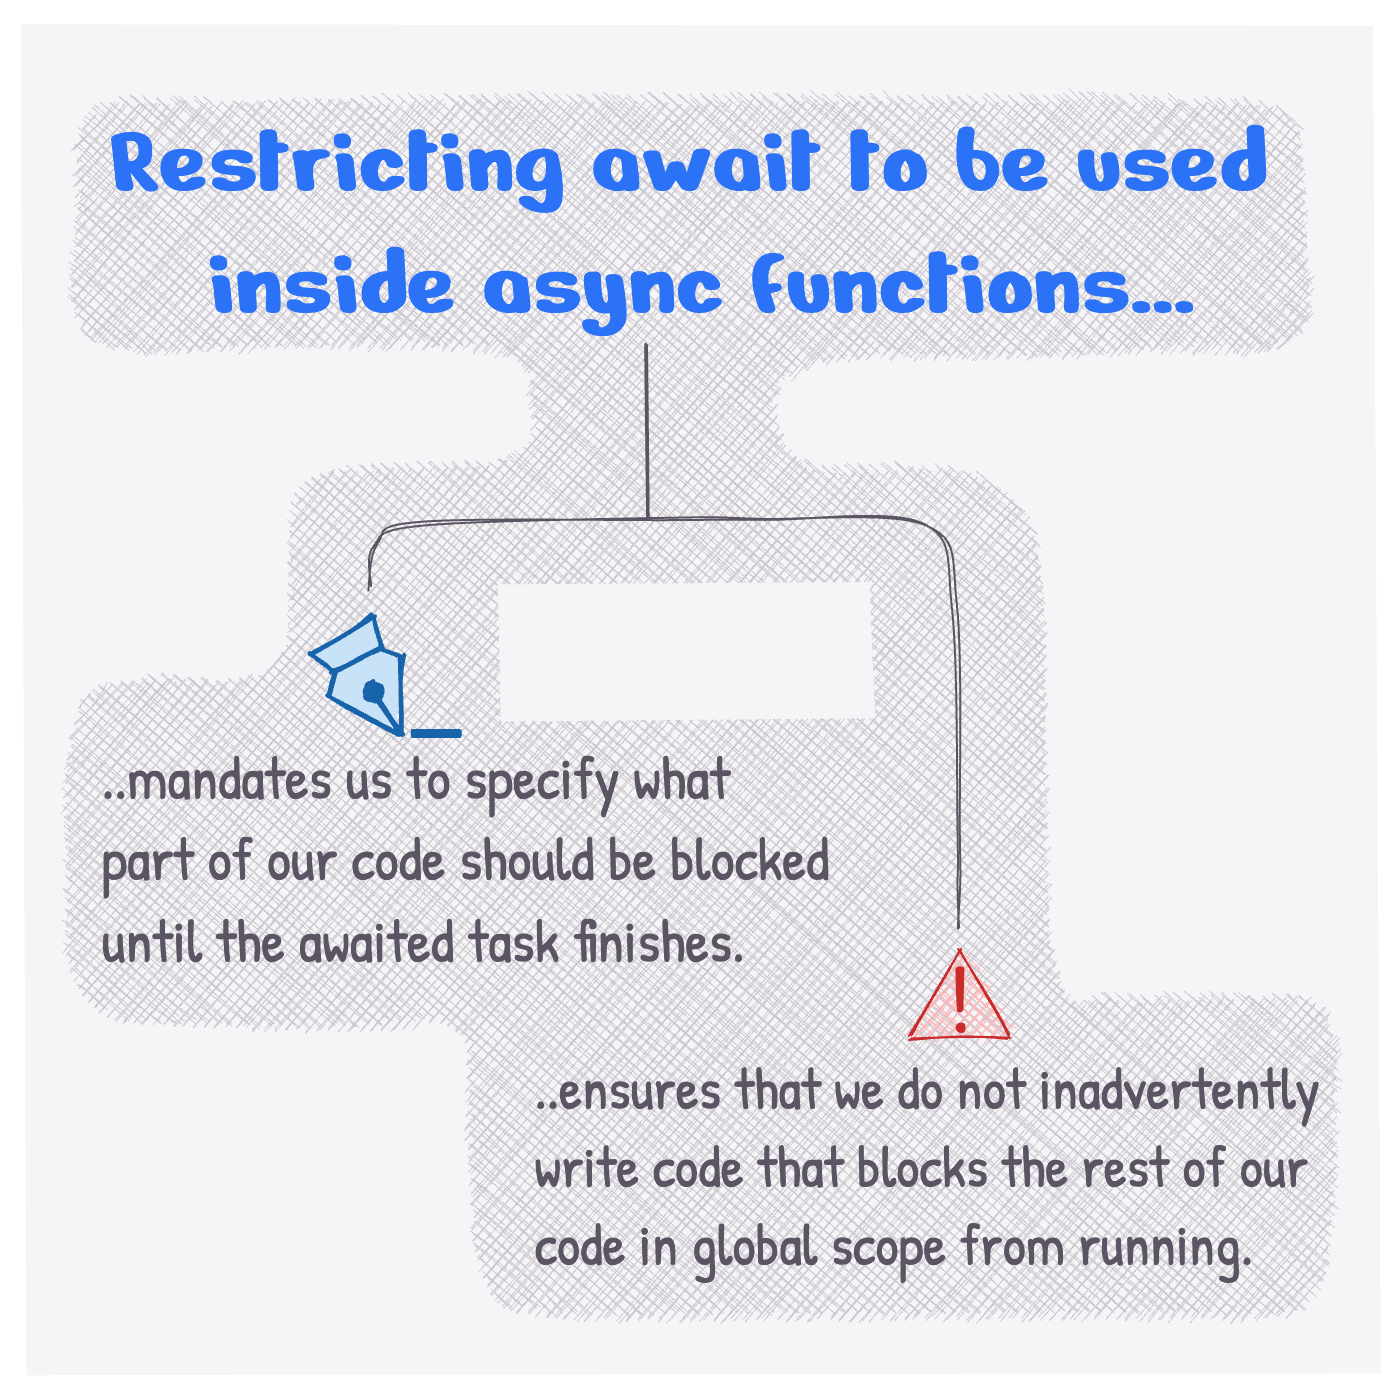 Restricting await to be used inside async functions (a) Mandates us to specify what part of our code should be blocked until the awaited task finishes and (b) Ensures that we do not inadvertently write code that causes the JavaScript engine to be unresponsive.